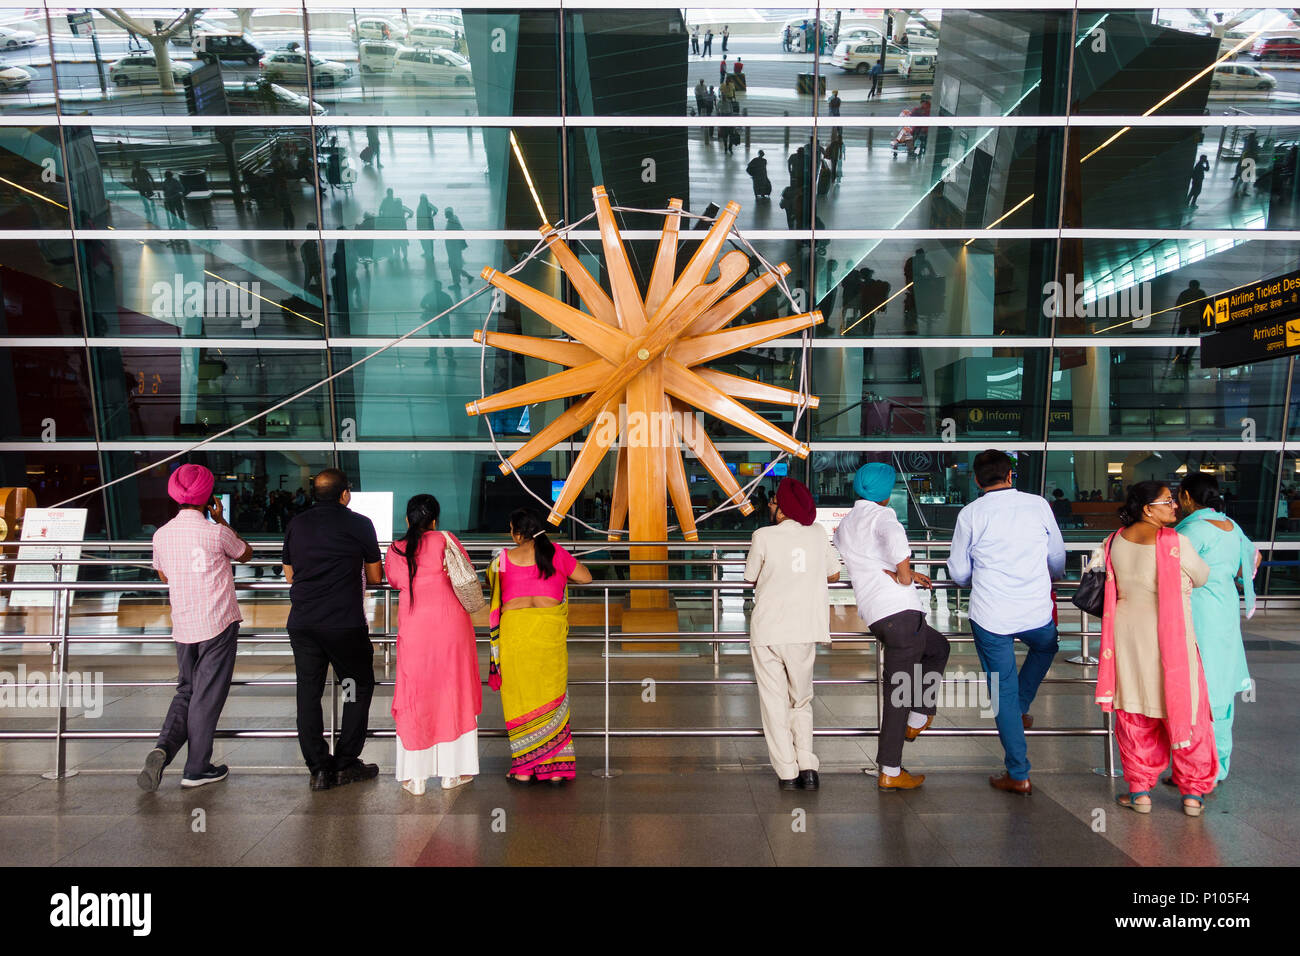 NEW DELHI, INDIA - CIRCA APRIL 2017: People stand in front of the world's largest charkha (spinning wheel) at Indira Gandhi International Airport. Stock Photo